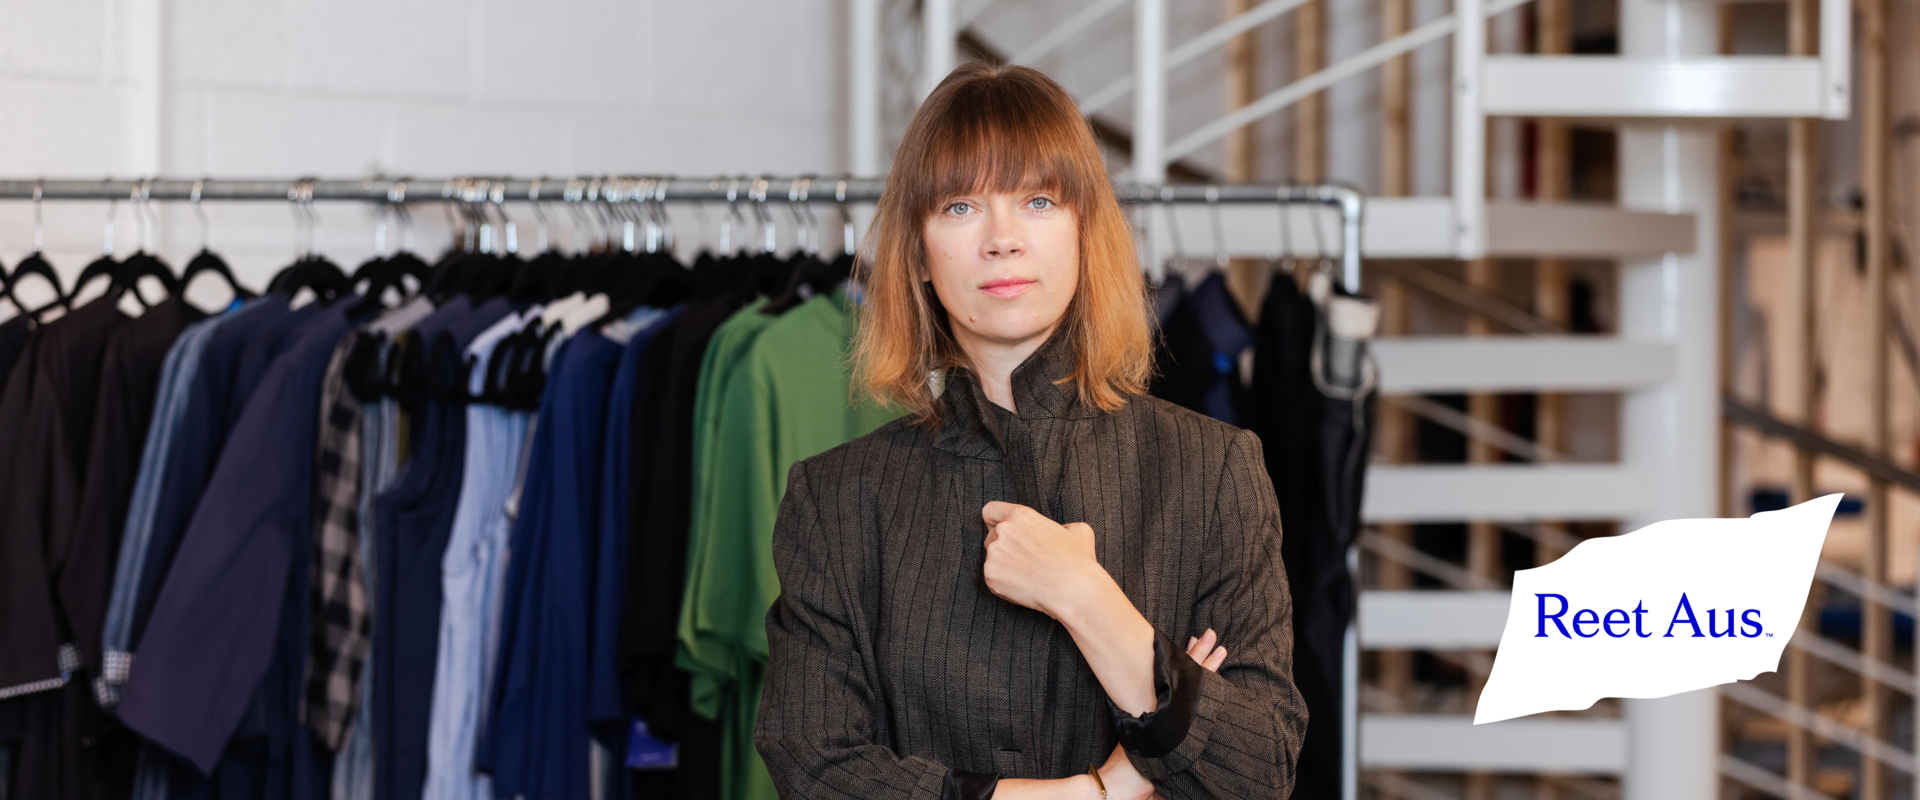 Reet Aus is a sustainable fashion designer and ardent visionary who devised industrial upcycling principles that reduce the fashion industrys impact o